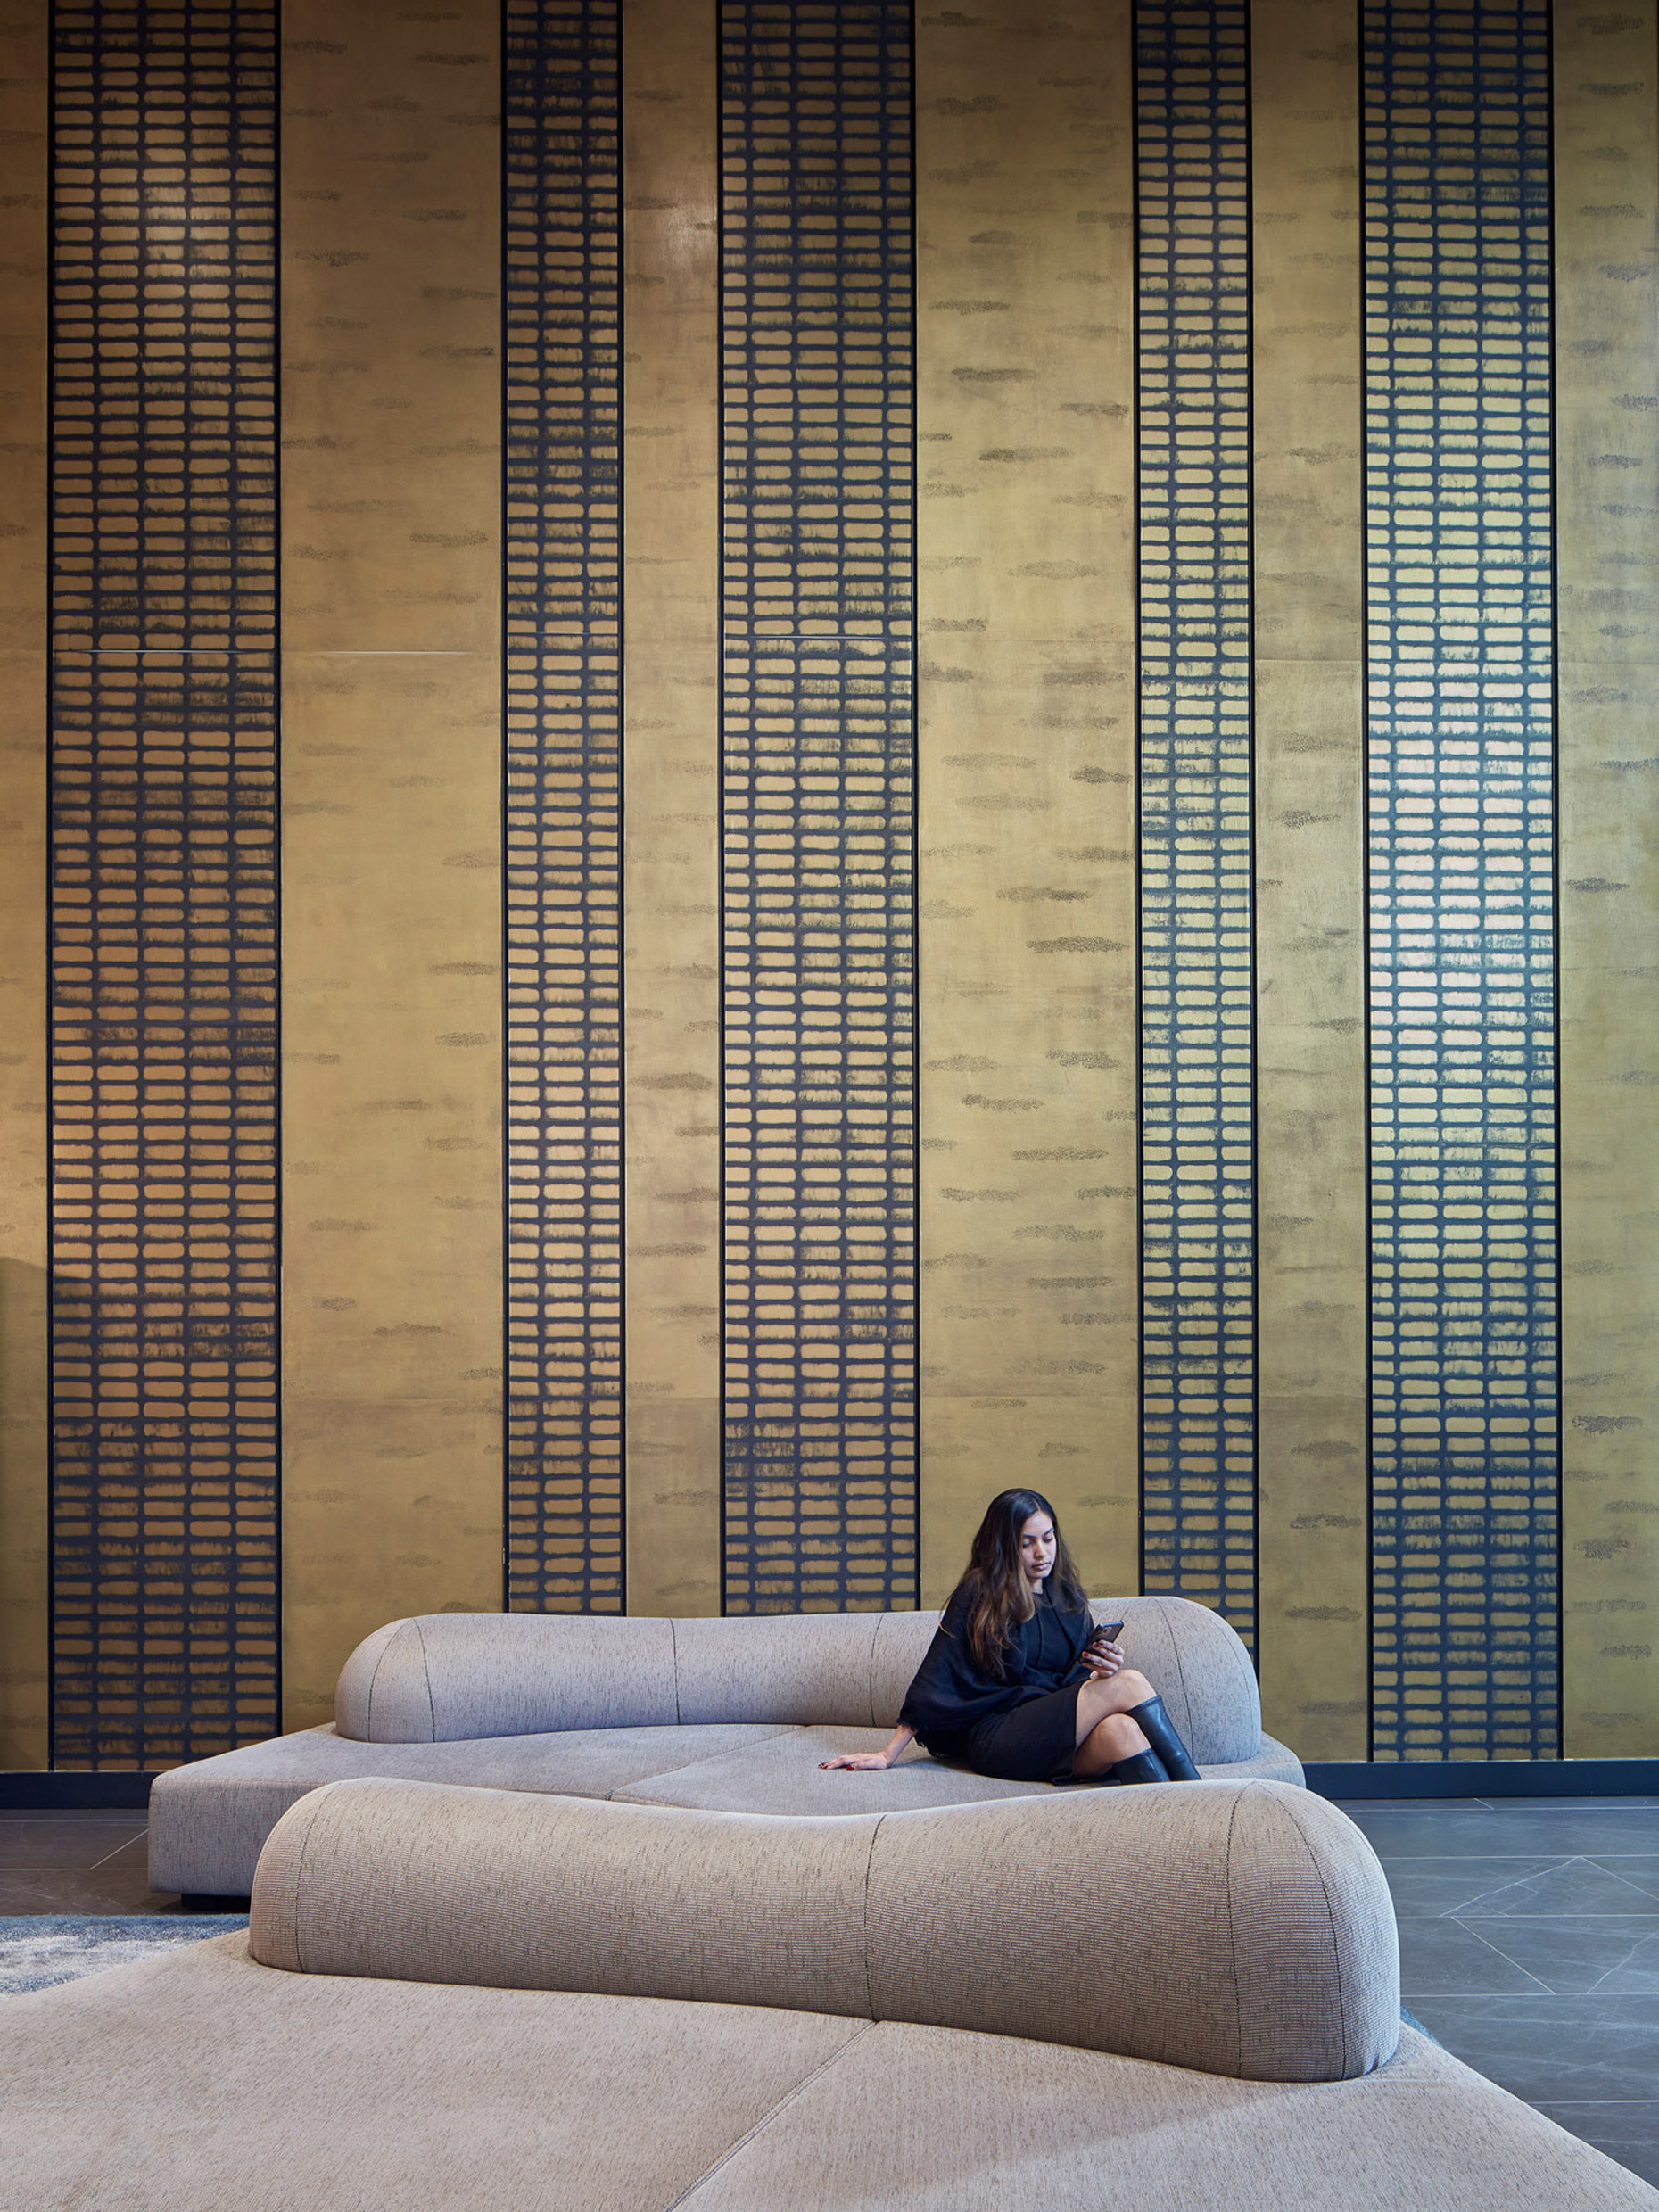 Sleek modern interior featuring a curved beige sofa centered on a grey area rug, with a wall behind adorned in vertical golden textured panels bisected by dark linear elements, creating a striking contrast. A woman sits casually on the sofa, engaging the space with a relaxed presence.